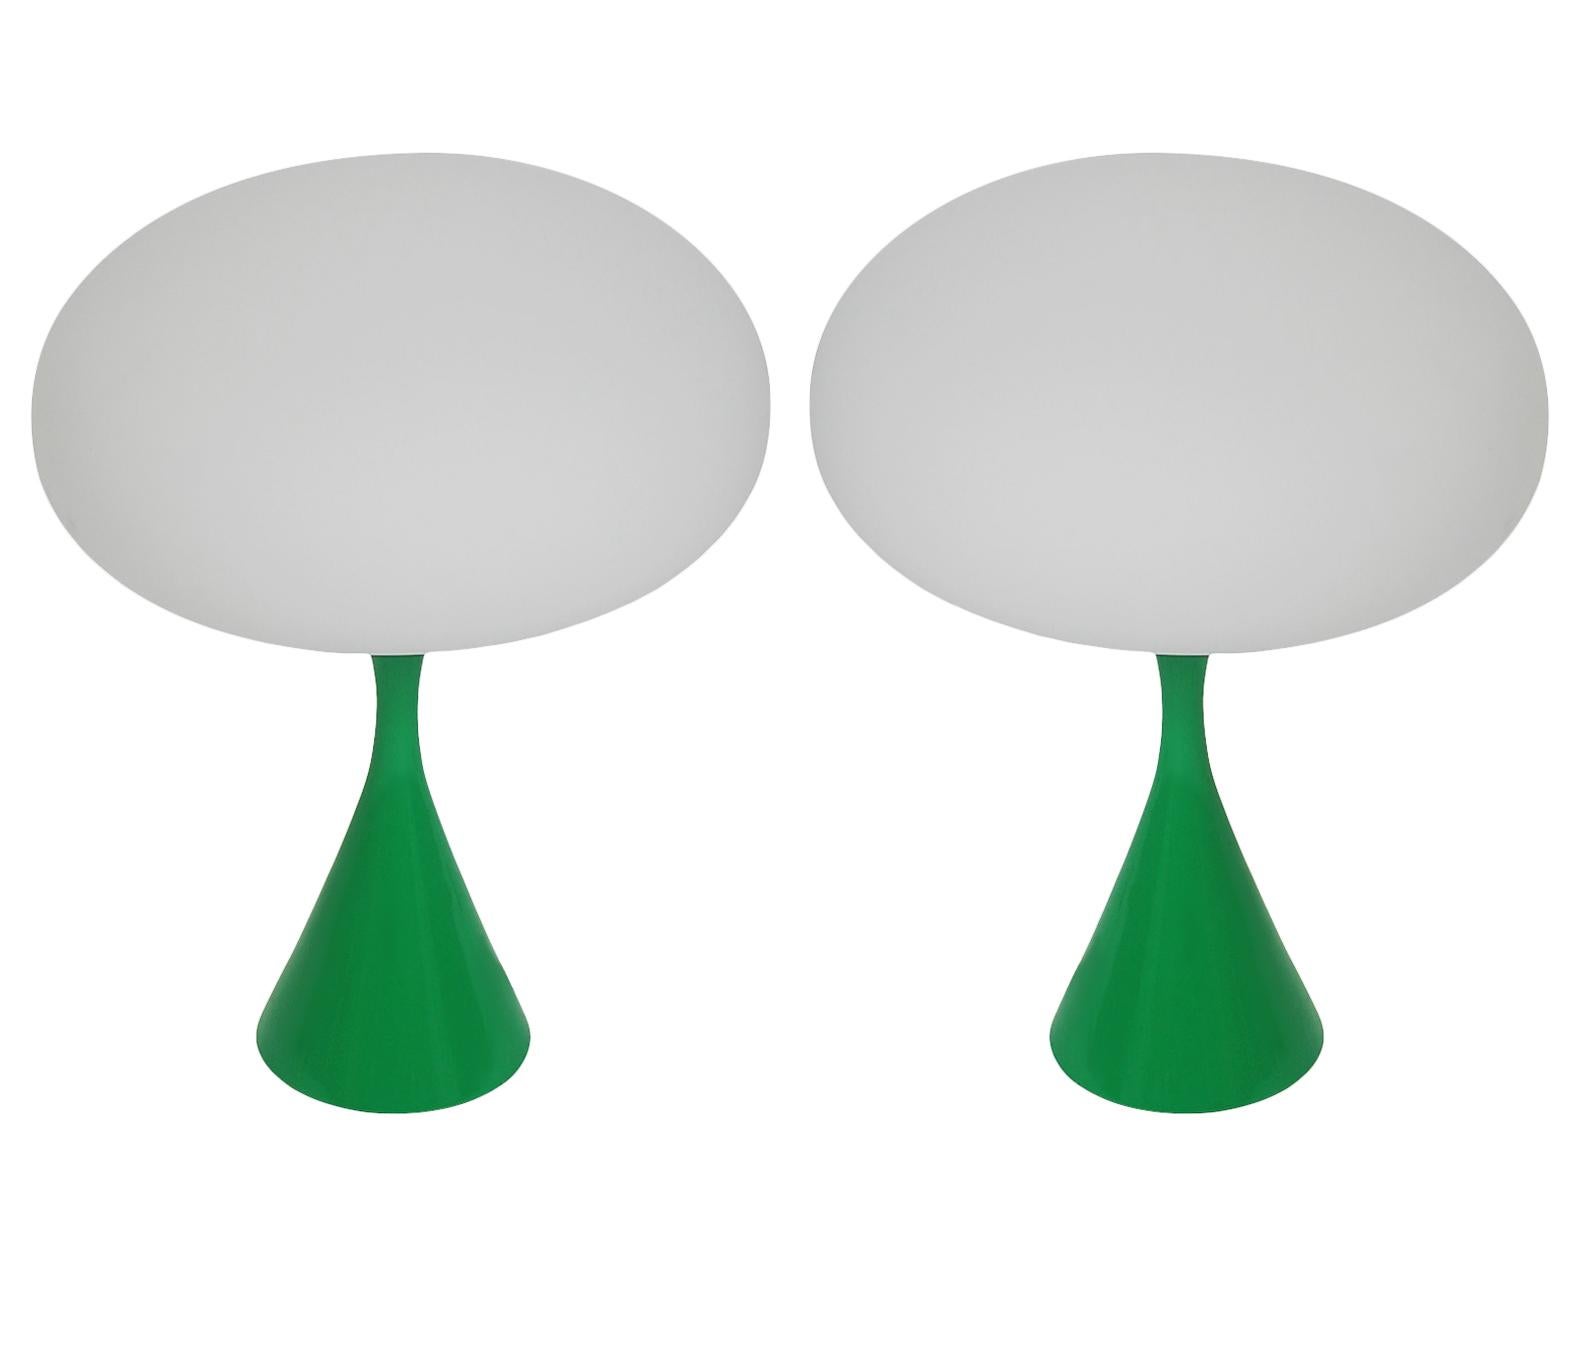 A handsome matching pair of table lamps in a conical mushroom form after Laurel Lamp Company. The lamp features a cast aluminum base with a green powder coat and a mouth blown frosted glass lamp shade. Price includes the pair as shown.